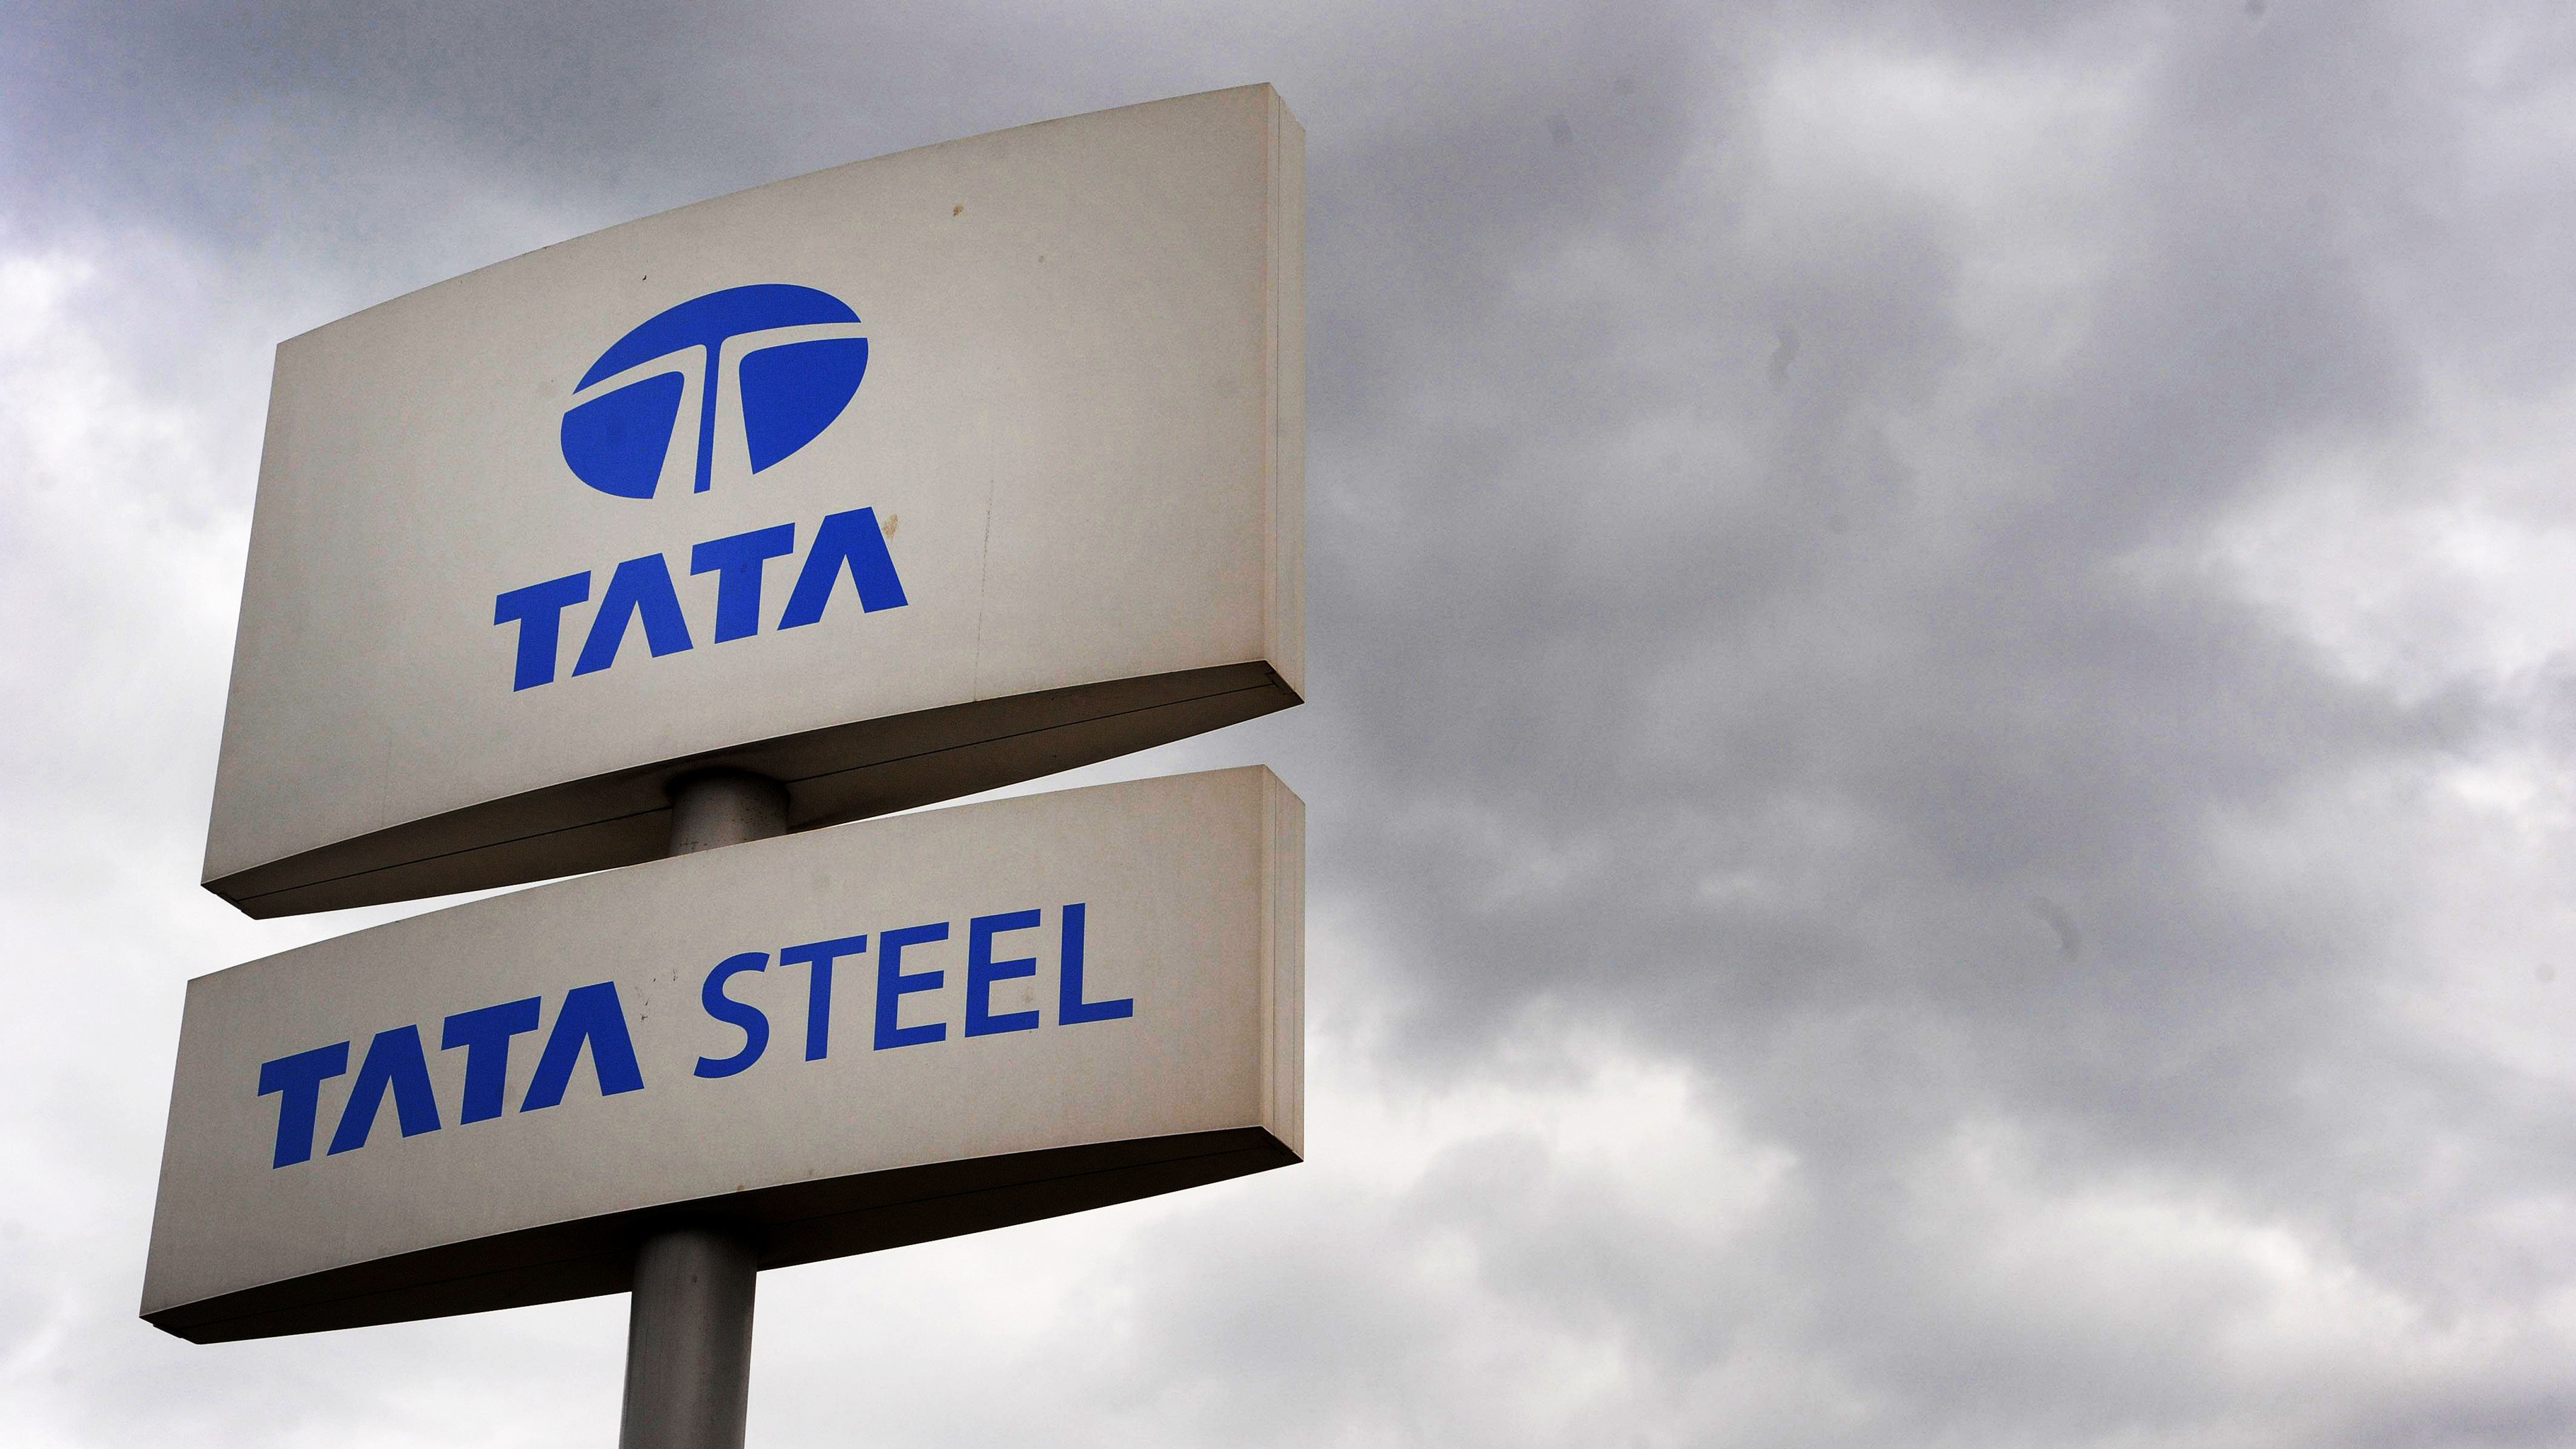 Tata steel (PA Wire/PA Images)